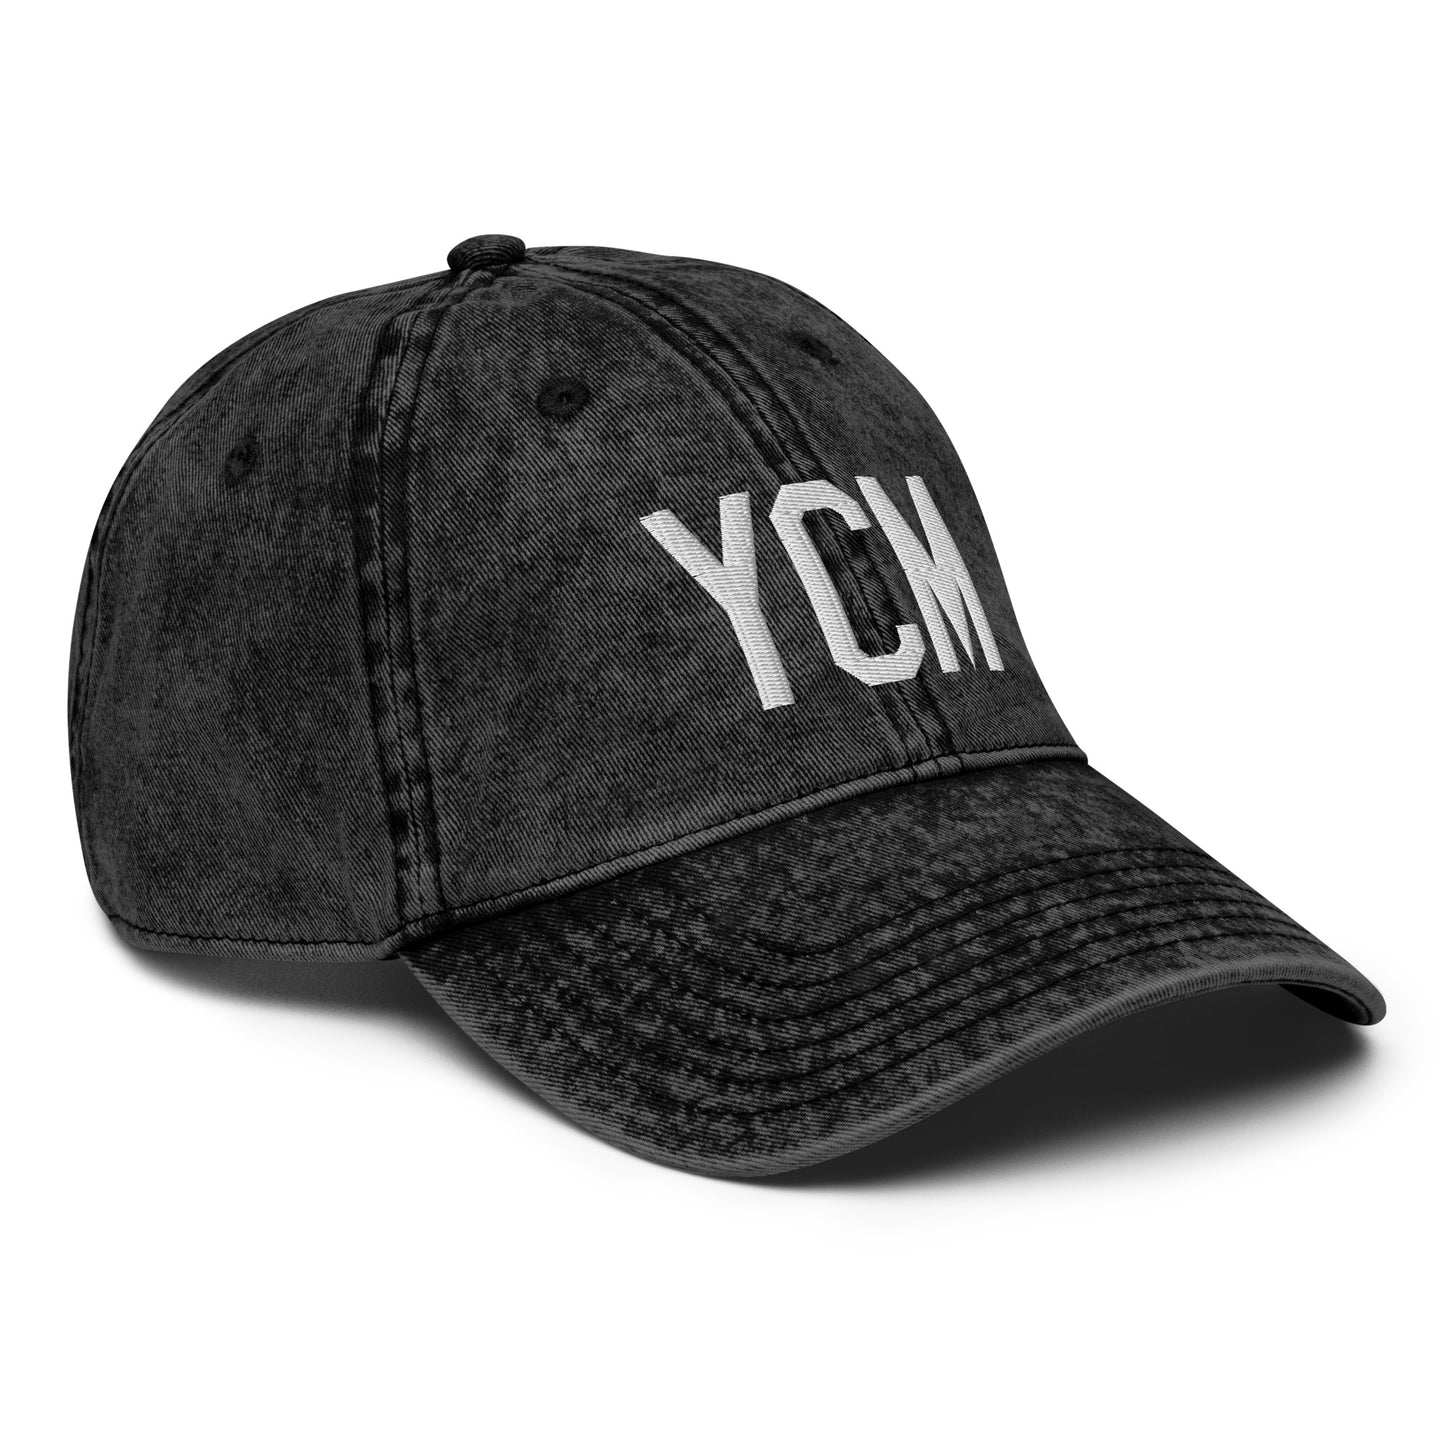 Airport Code Twill Cap - White • YCM St. Catharines • YHM Designs - Image 15